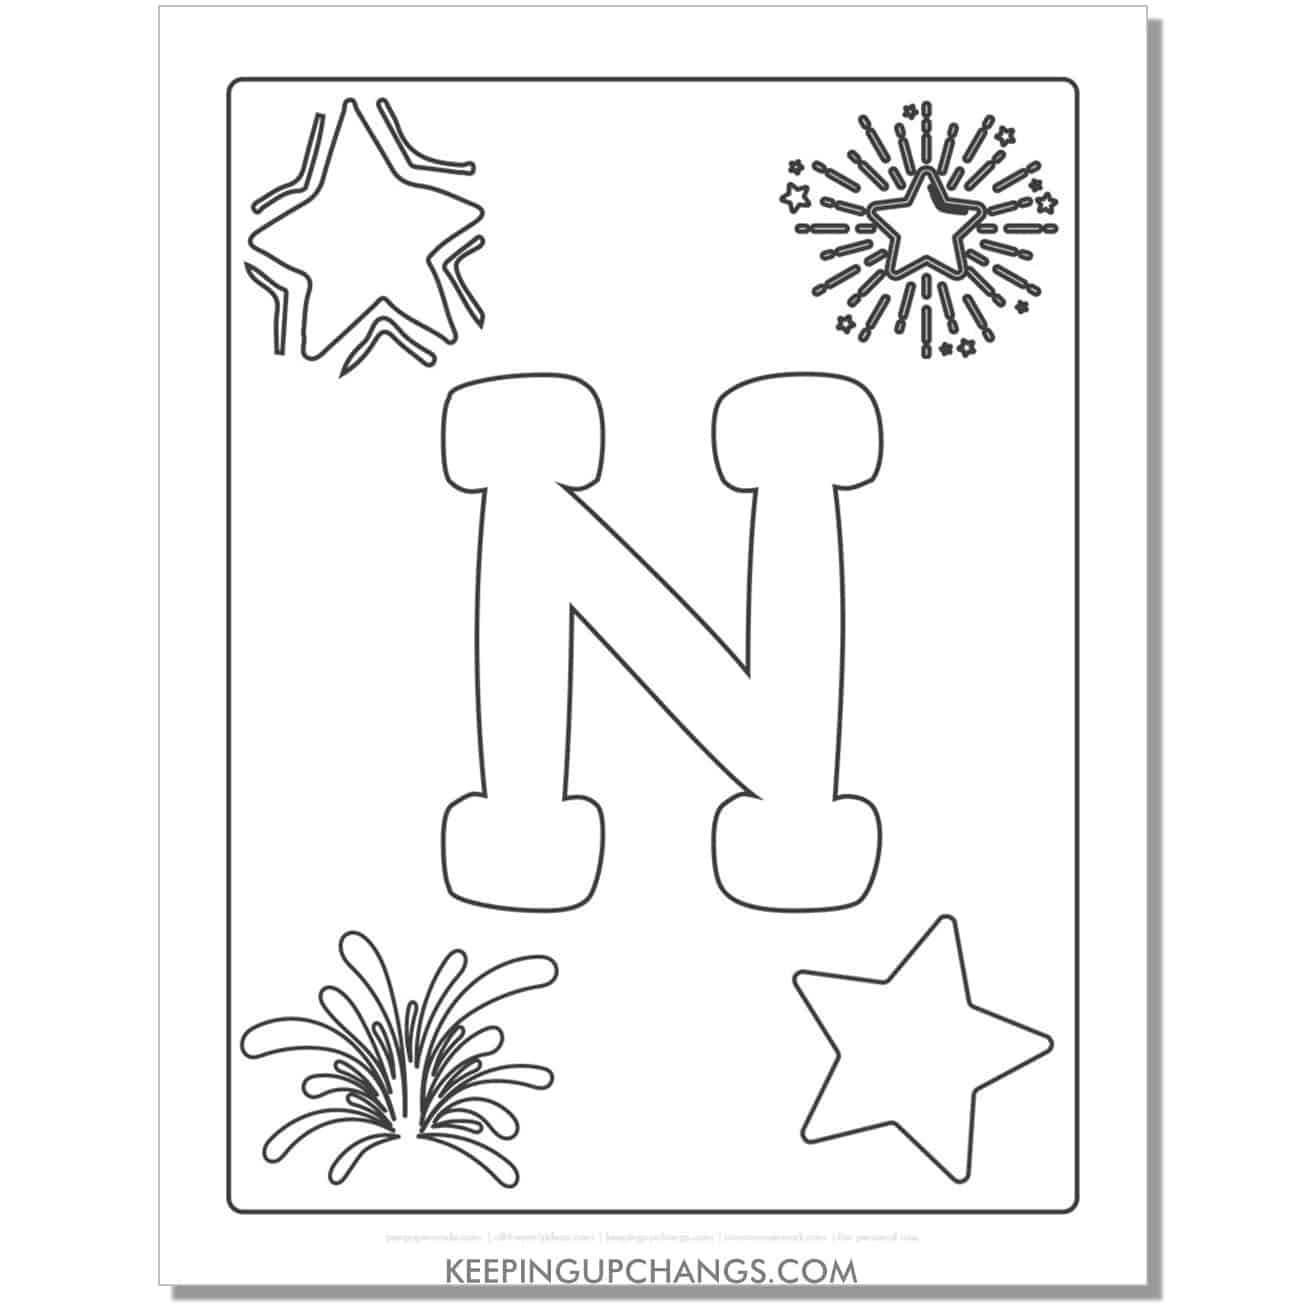 cool letter n to color with stars, space theme.